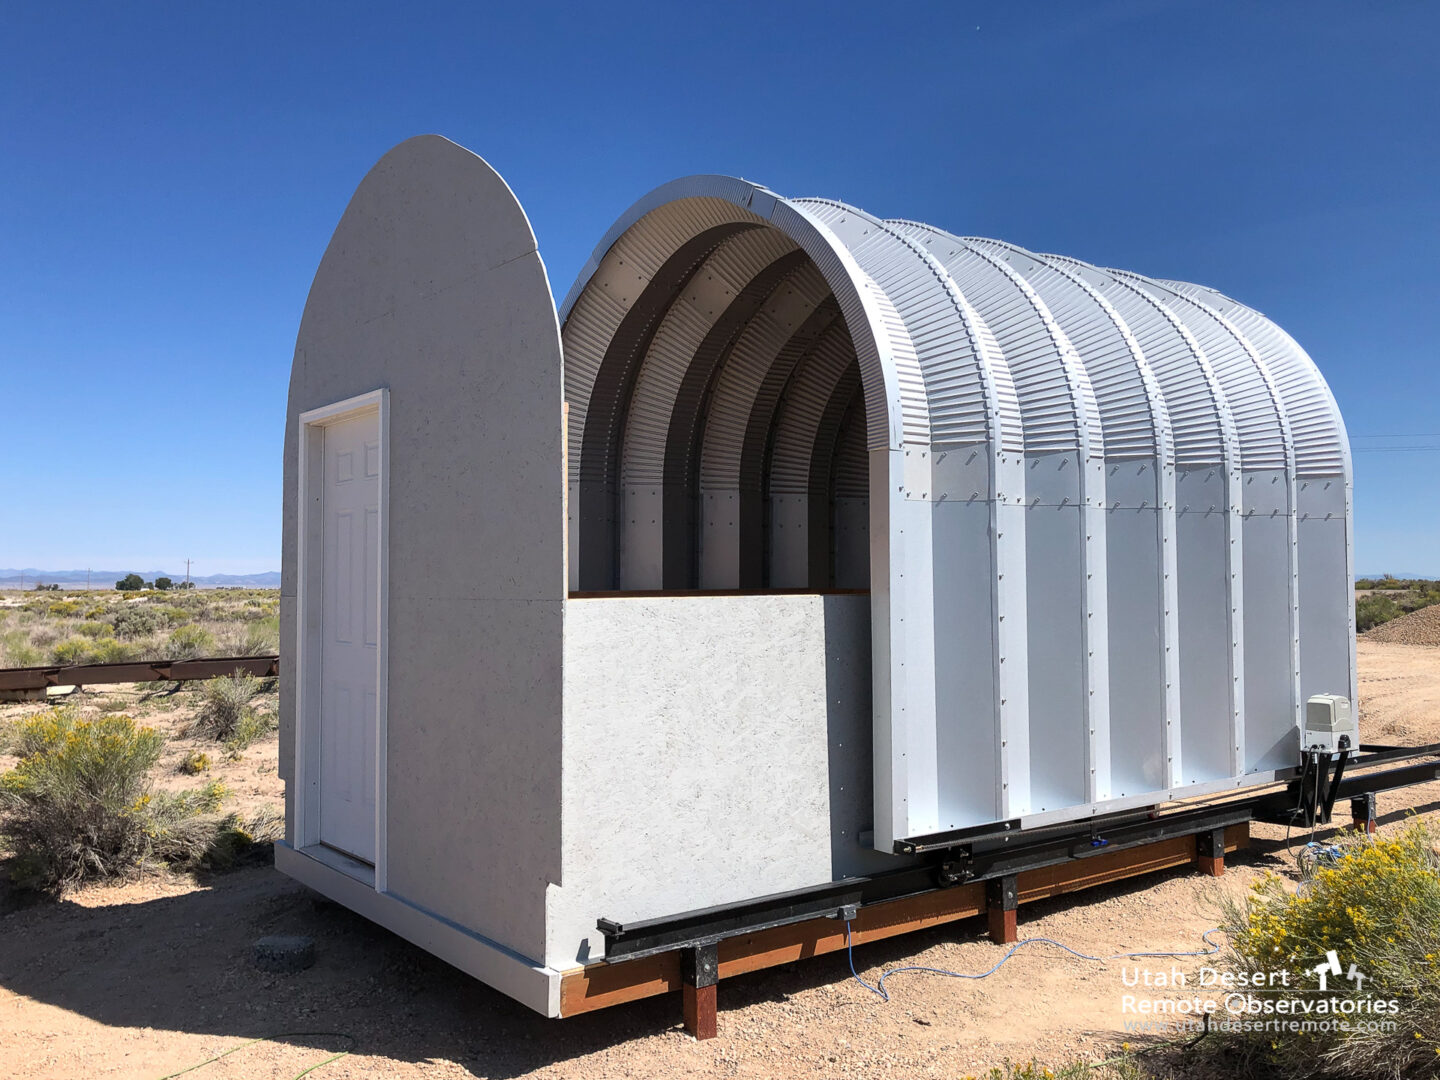 Half-open S-Model Quonset hut shed